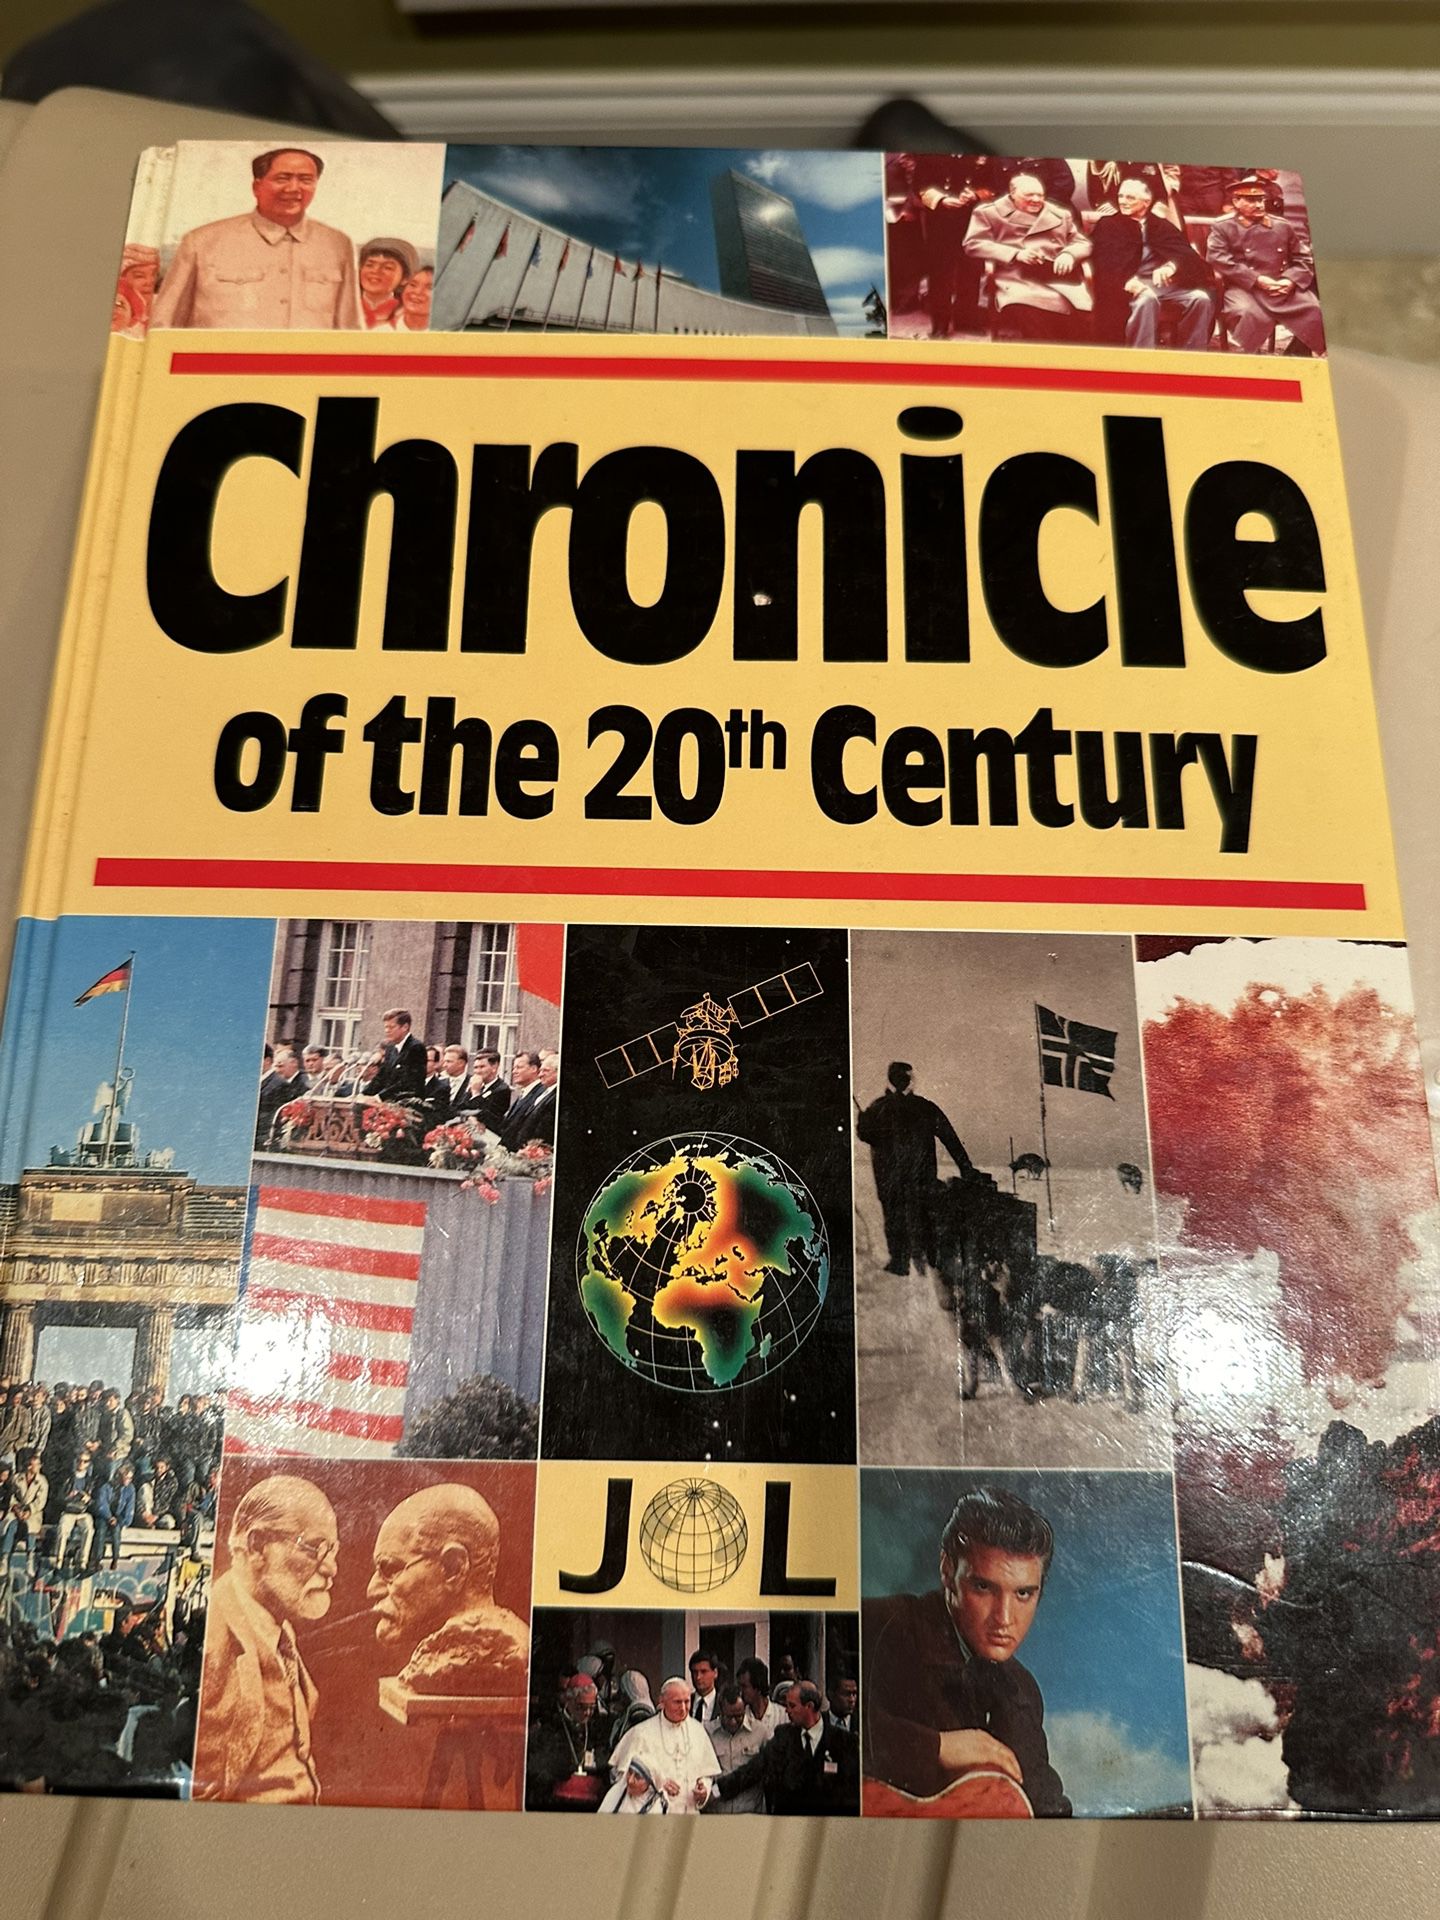 Chronicle of the 20th Century Book